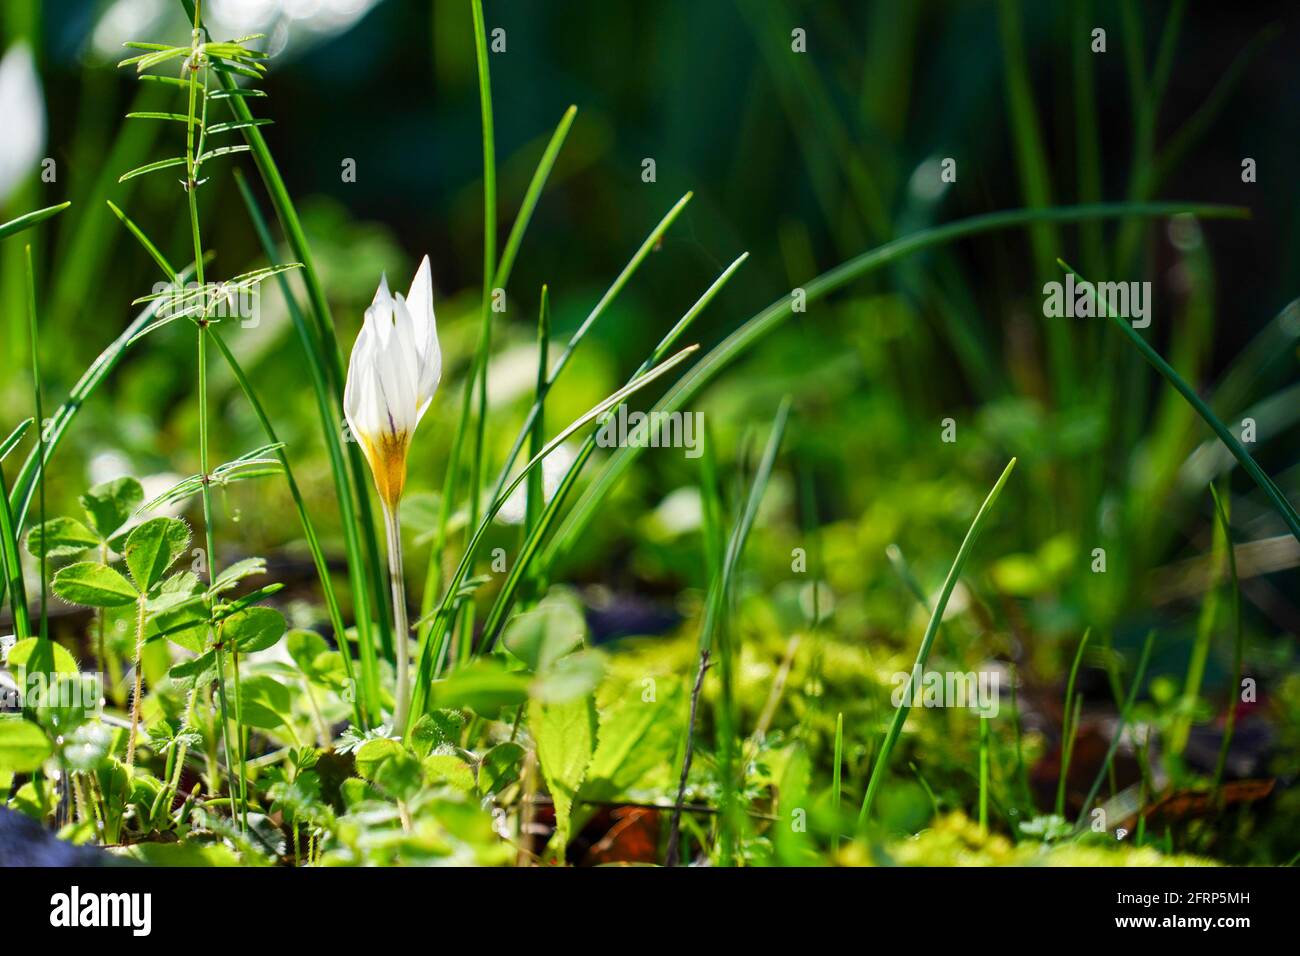 Crocus aleppicus is a species of flowering plant in the genus Crocus of the family Iridaceae, that is found from West Syria to Jordan. Photographed in Stock Photo